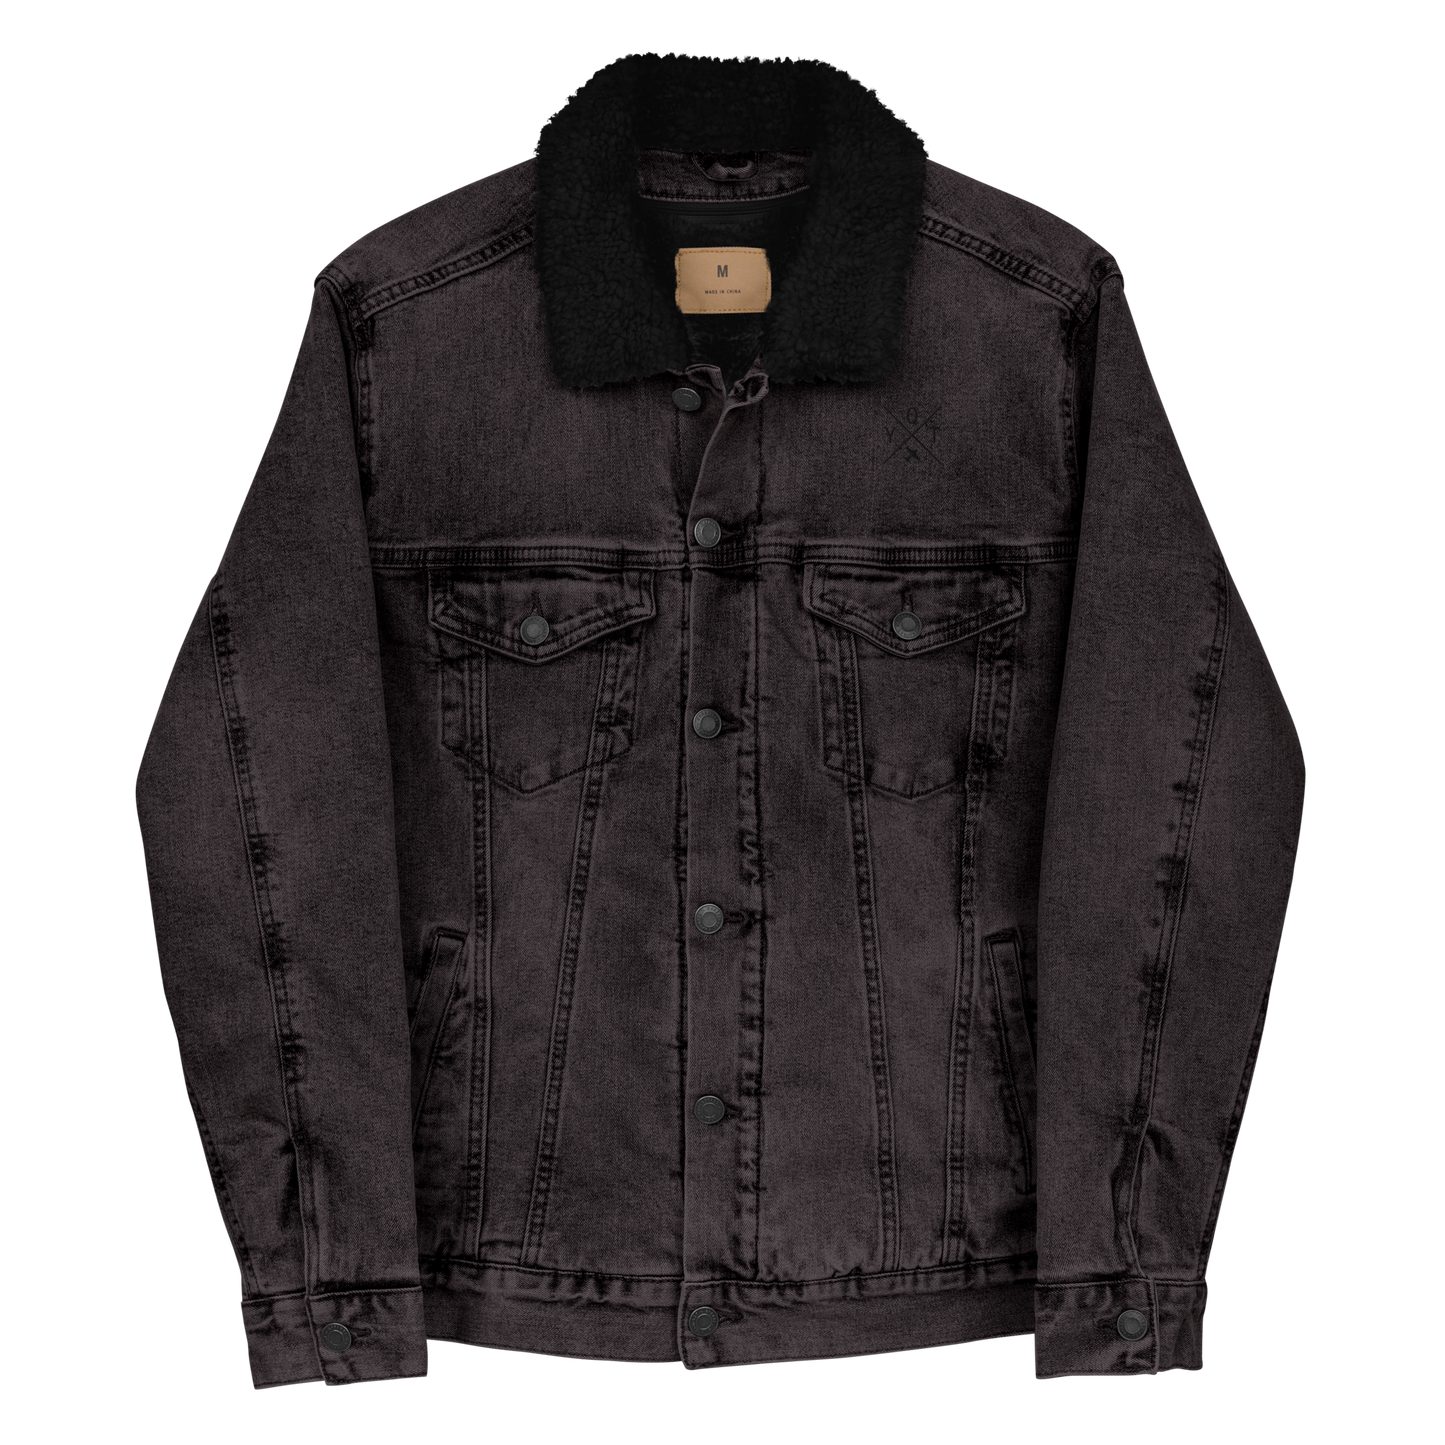 YHM Designs - YQT Thunder Bay Denim Sherpa Jacket - Crossed-X Design with Airport Code and Vintage Propliner - Black & White Embroidery - Image 06